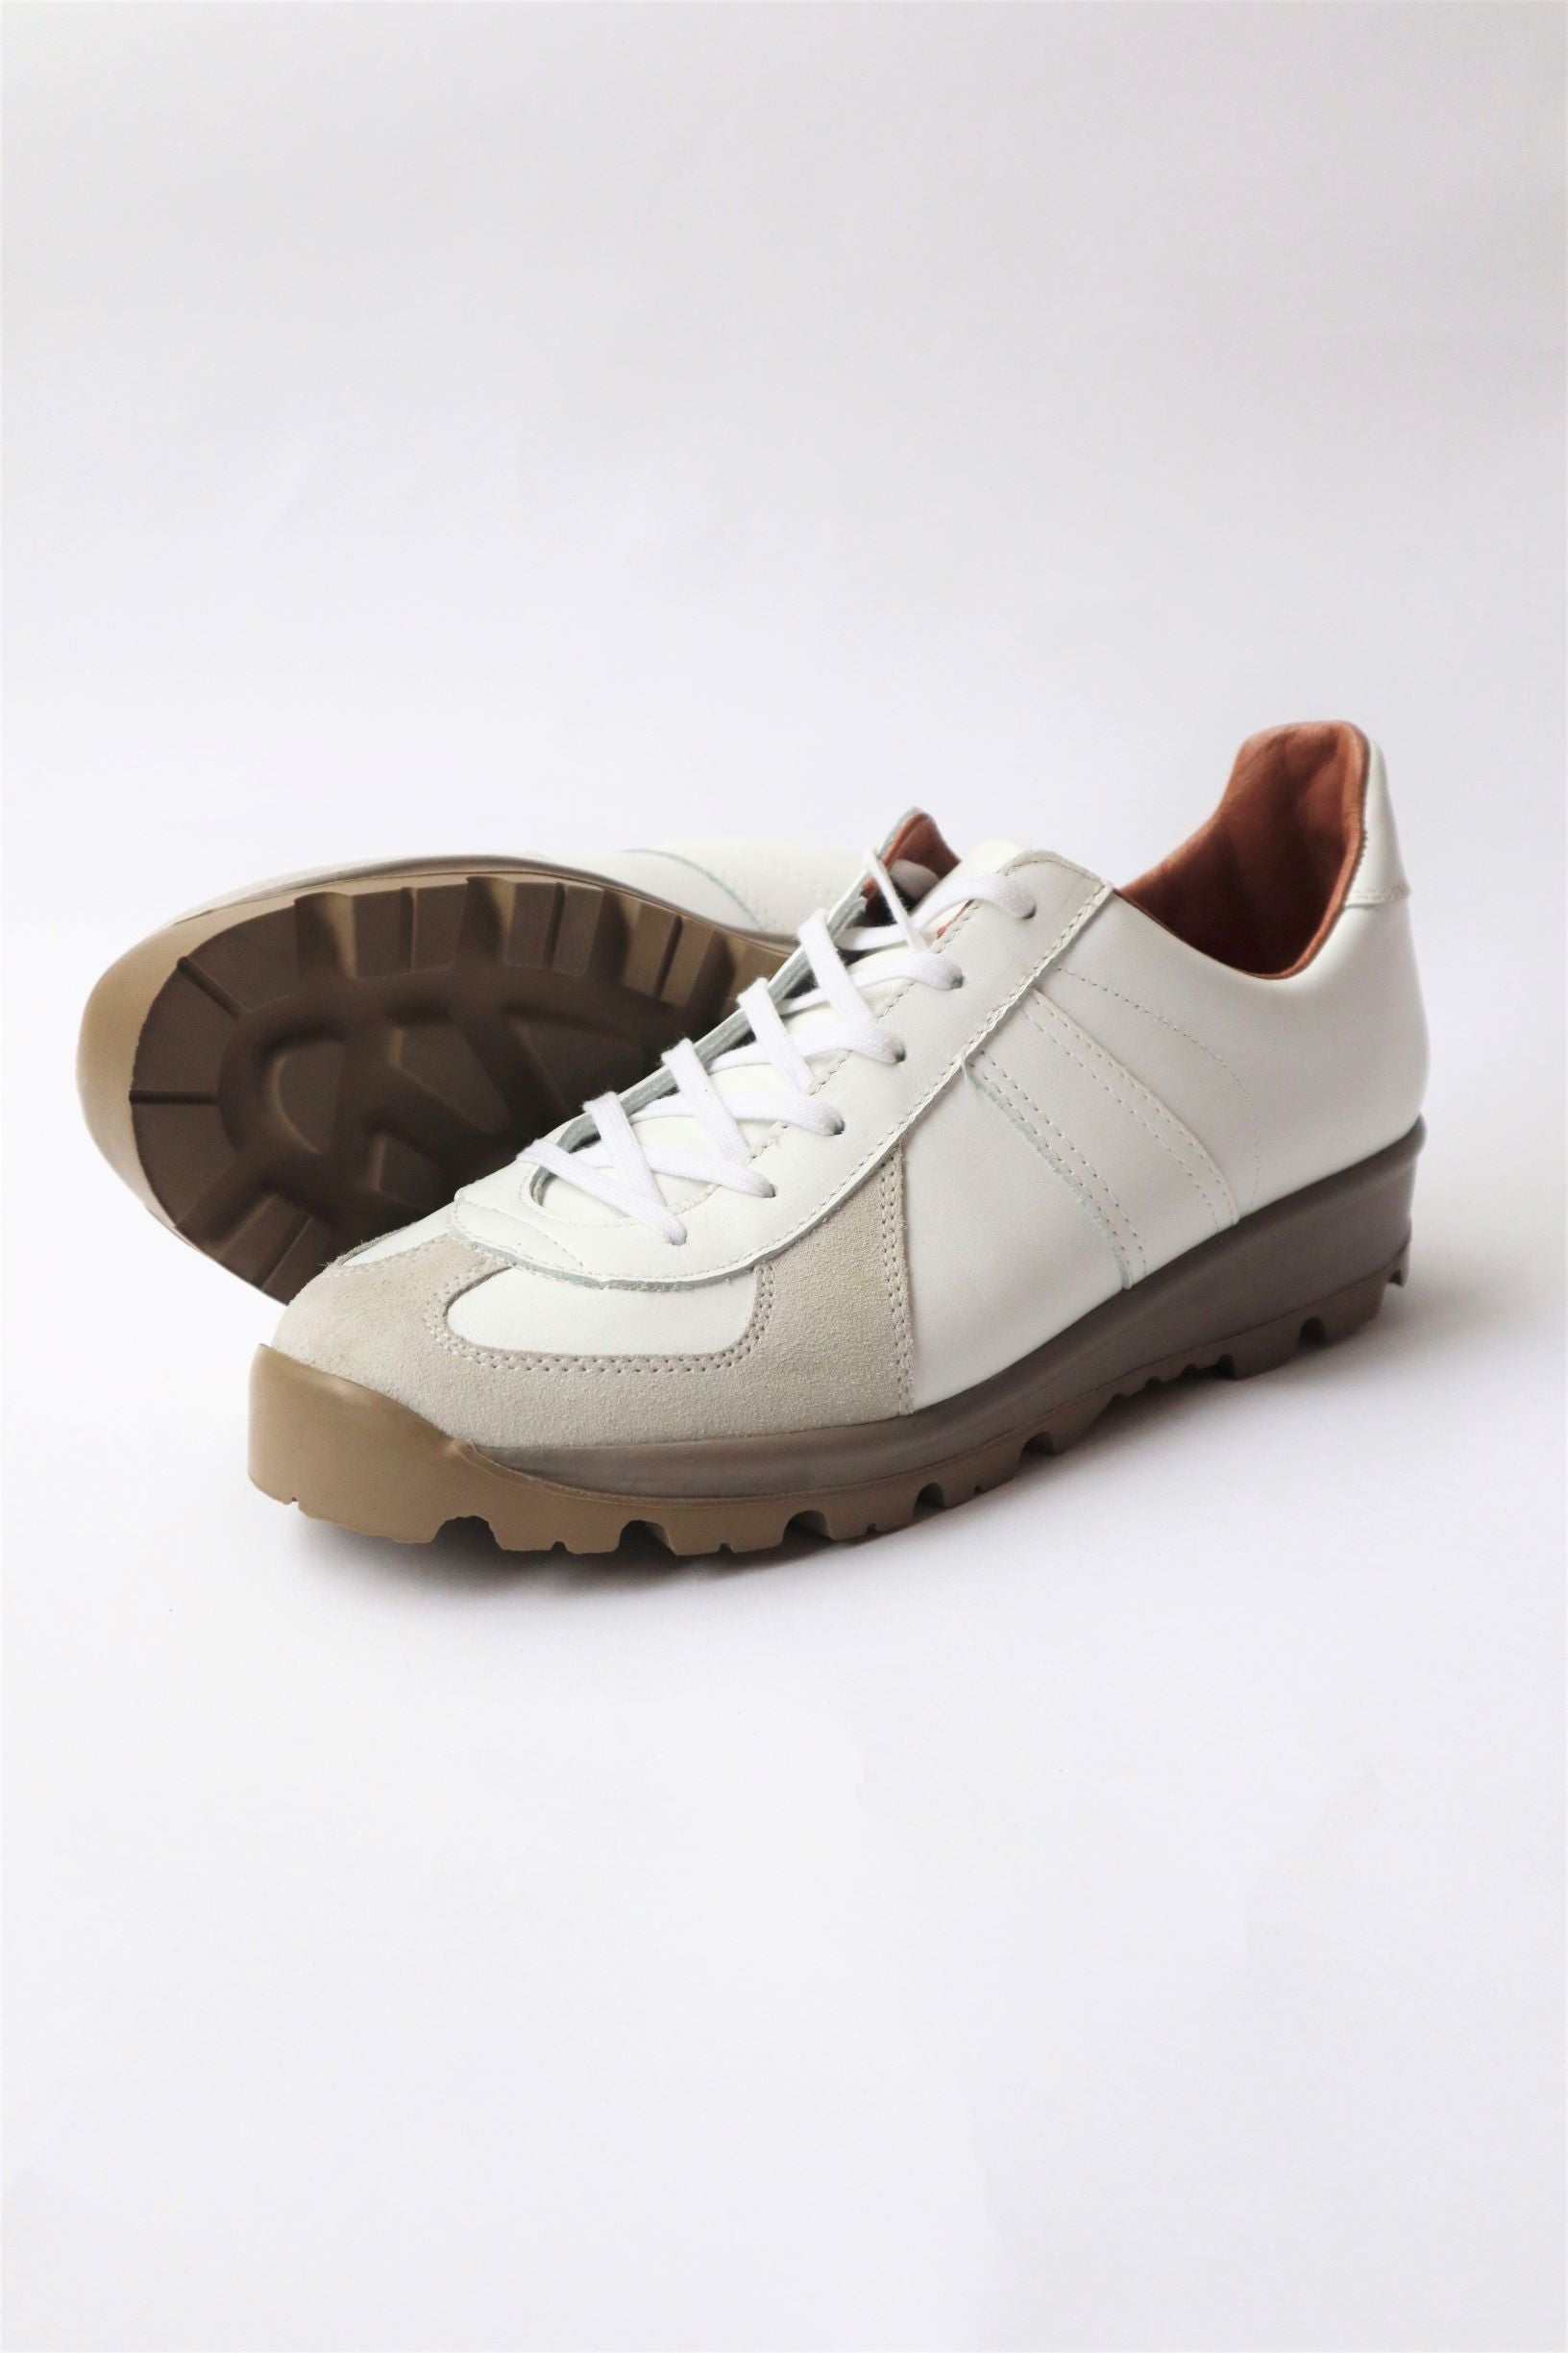 REPRODUCTION OF FOUND | 1759L GERMAN MILITARY TRAINER White